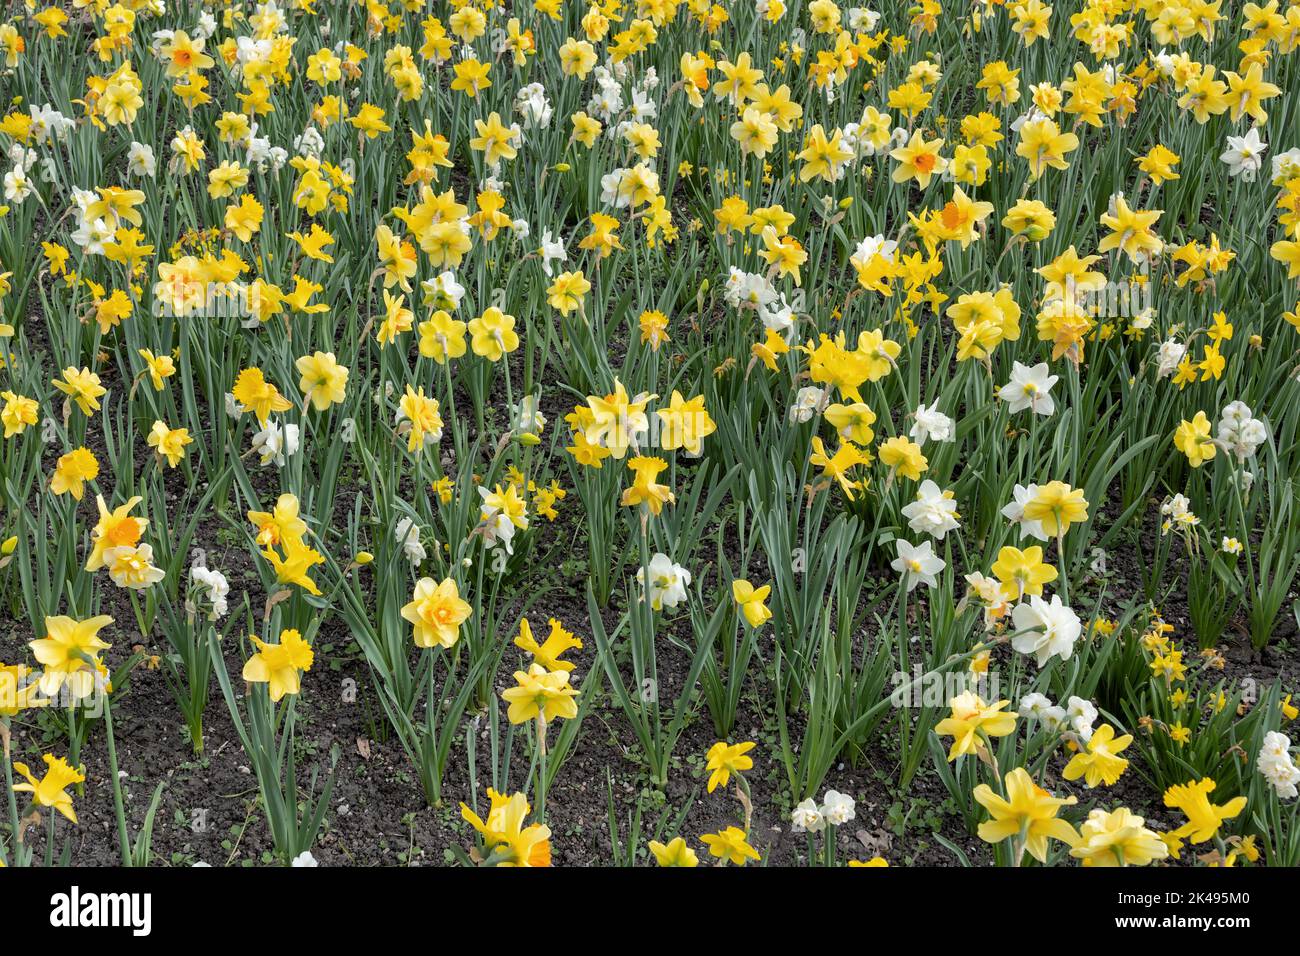 Field of Narcissus daffodil blooming flowers, spring flowering perennial plant of the amaryllis family Amaryllidaceae. Stock Photo